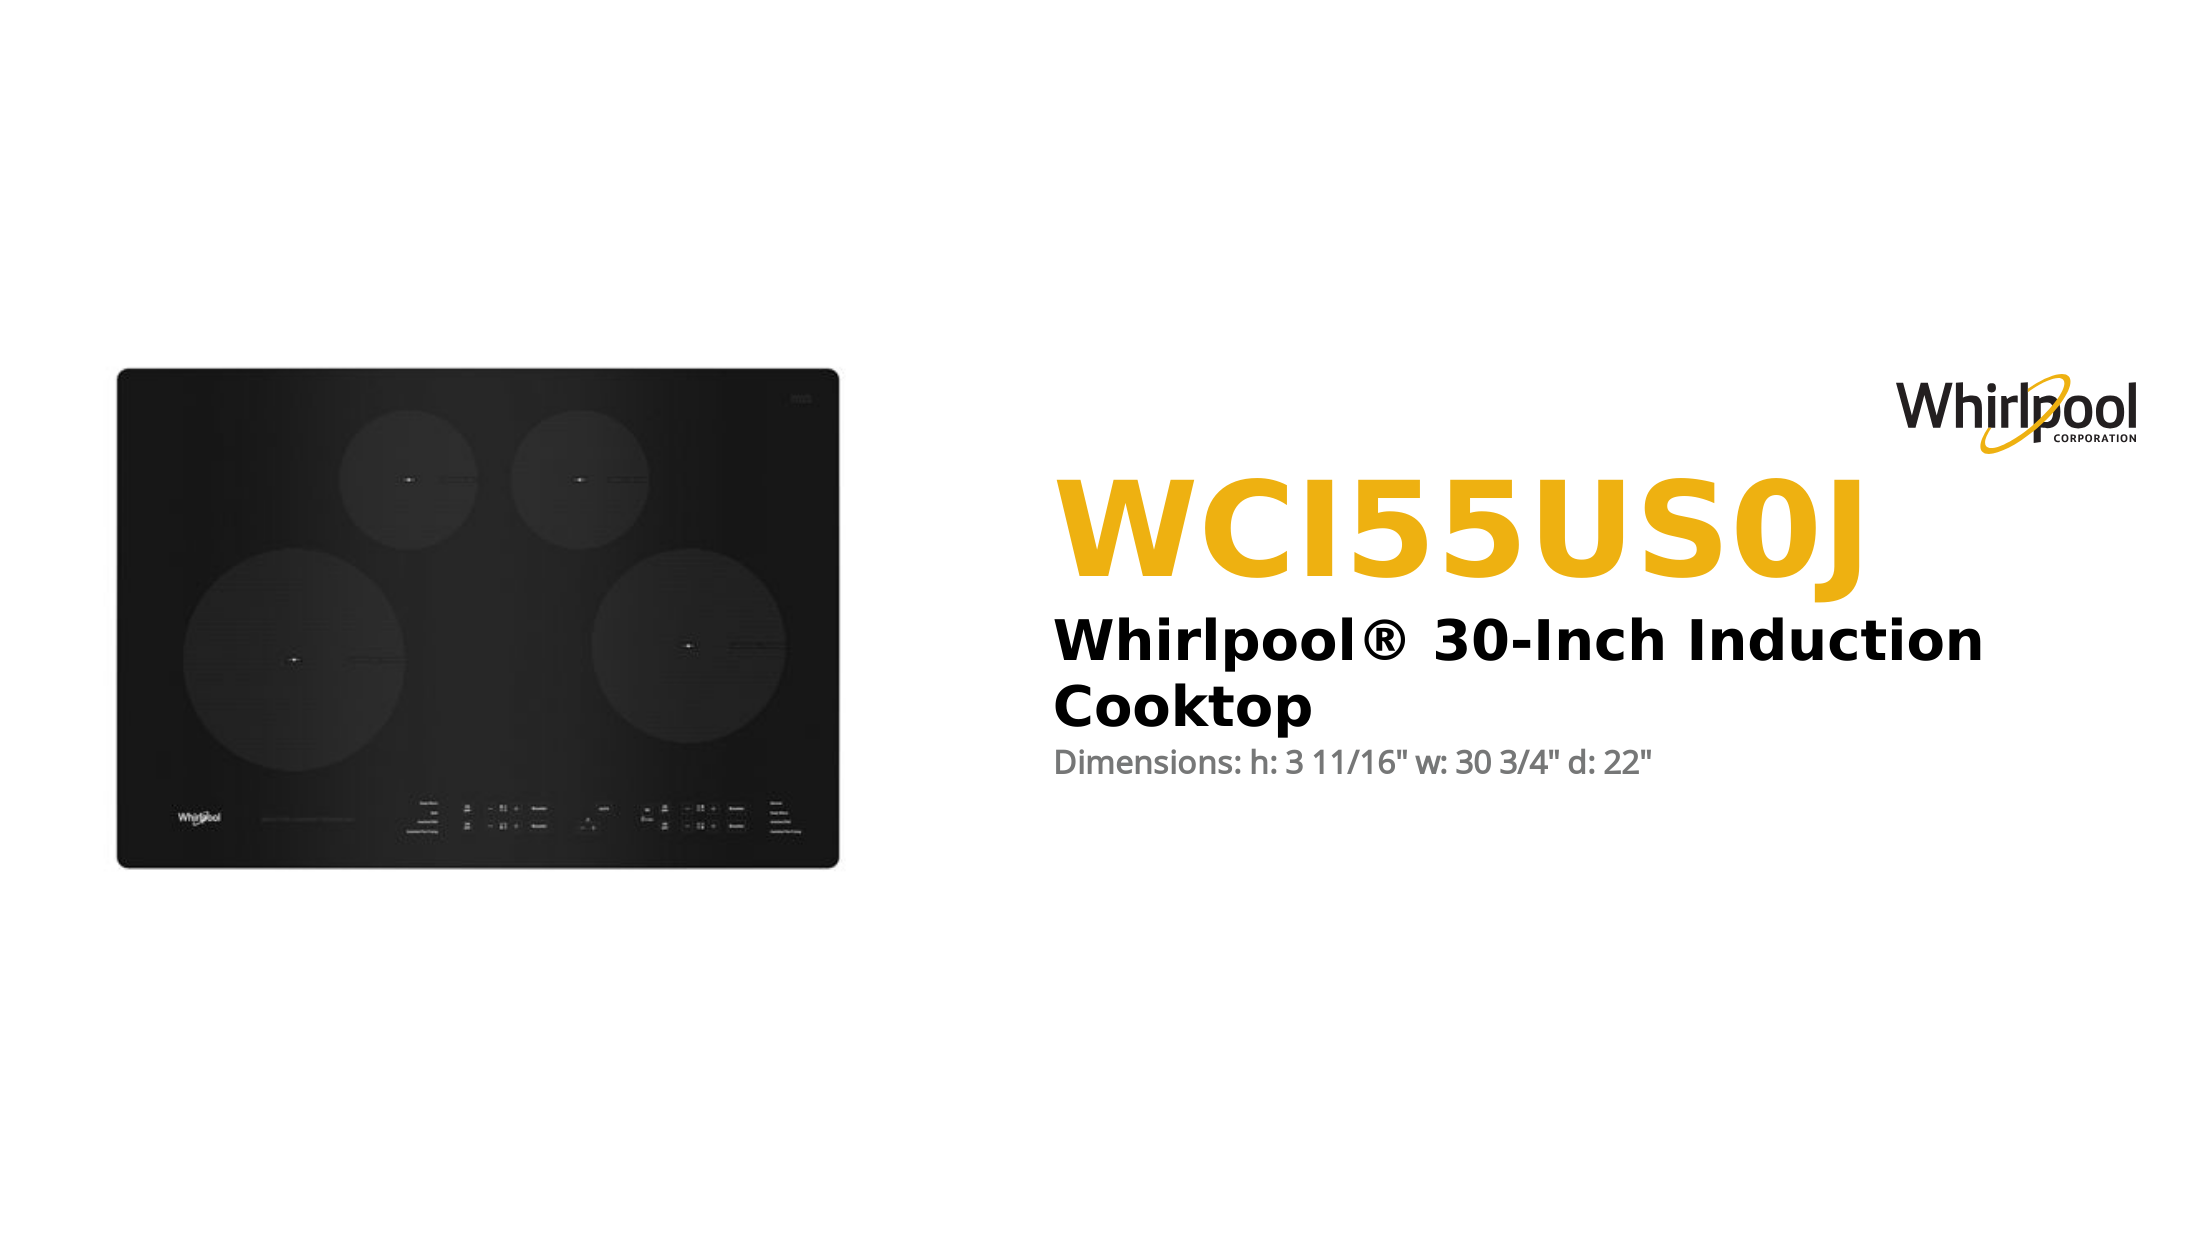 Whirlpool® 30-Inch Induction Cooktop